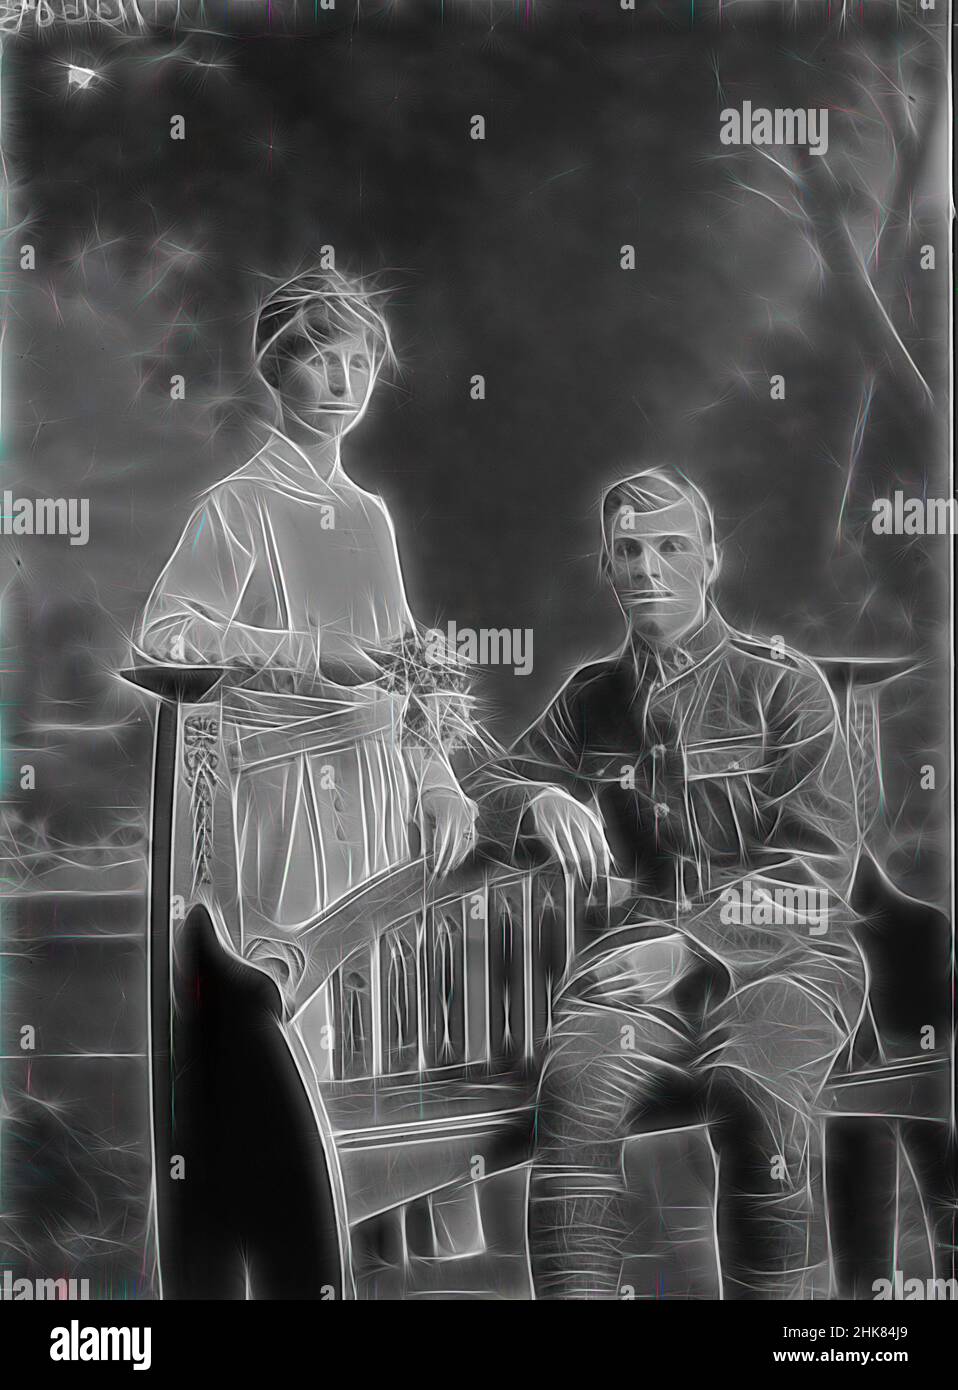 Inspired by Private James Arthur Hoverd and his bride Florence Lilian Davies, Berry & Co, photography studio, 20 July 1918, Wellington, Wedding portrait of Private James Arthur Hoverd and Florence Lilian Hoverd, Reimagined by Artotop. Classic art reinvented with a modern twist. Design of warm cheerful glowing of brightness and light ray radiance. Photography inspired by surrealism and futurism, embracing dynamic energy of modern technology, movement, speed and revolutionize culture Stock Photo